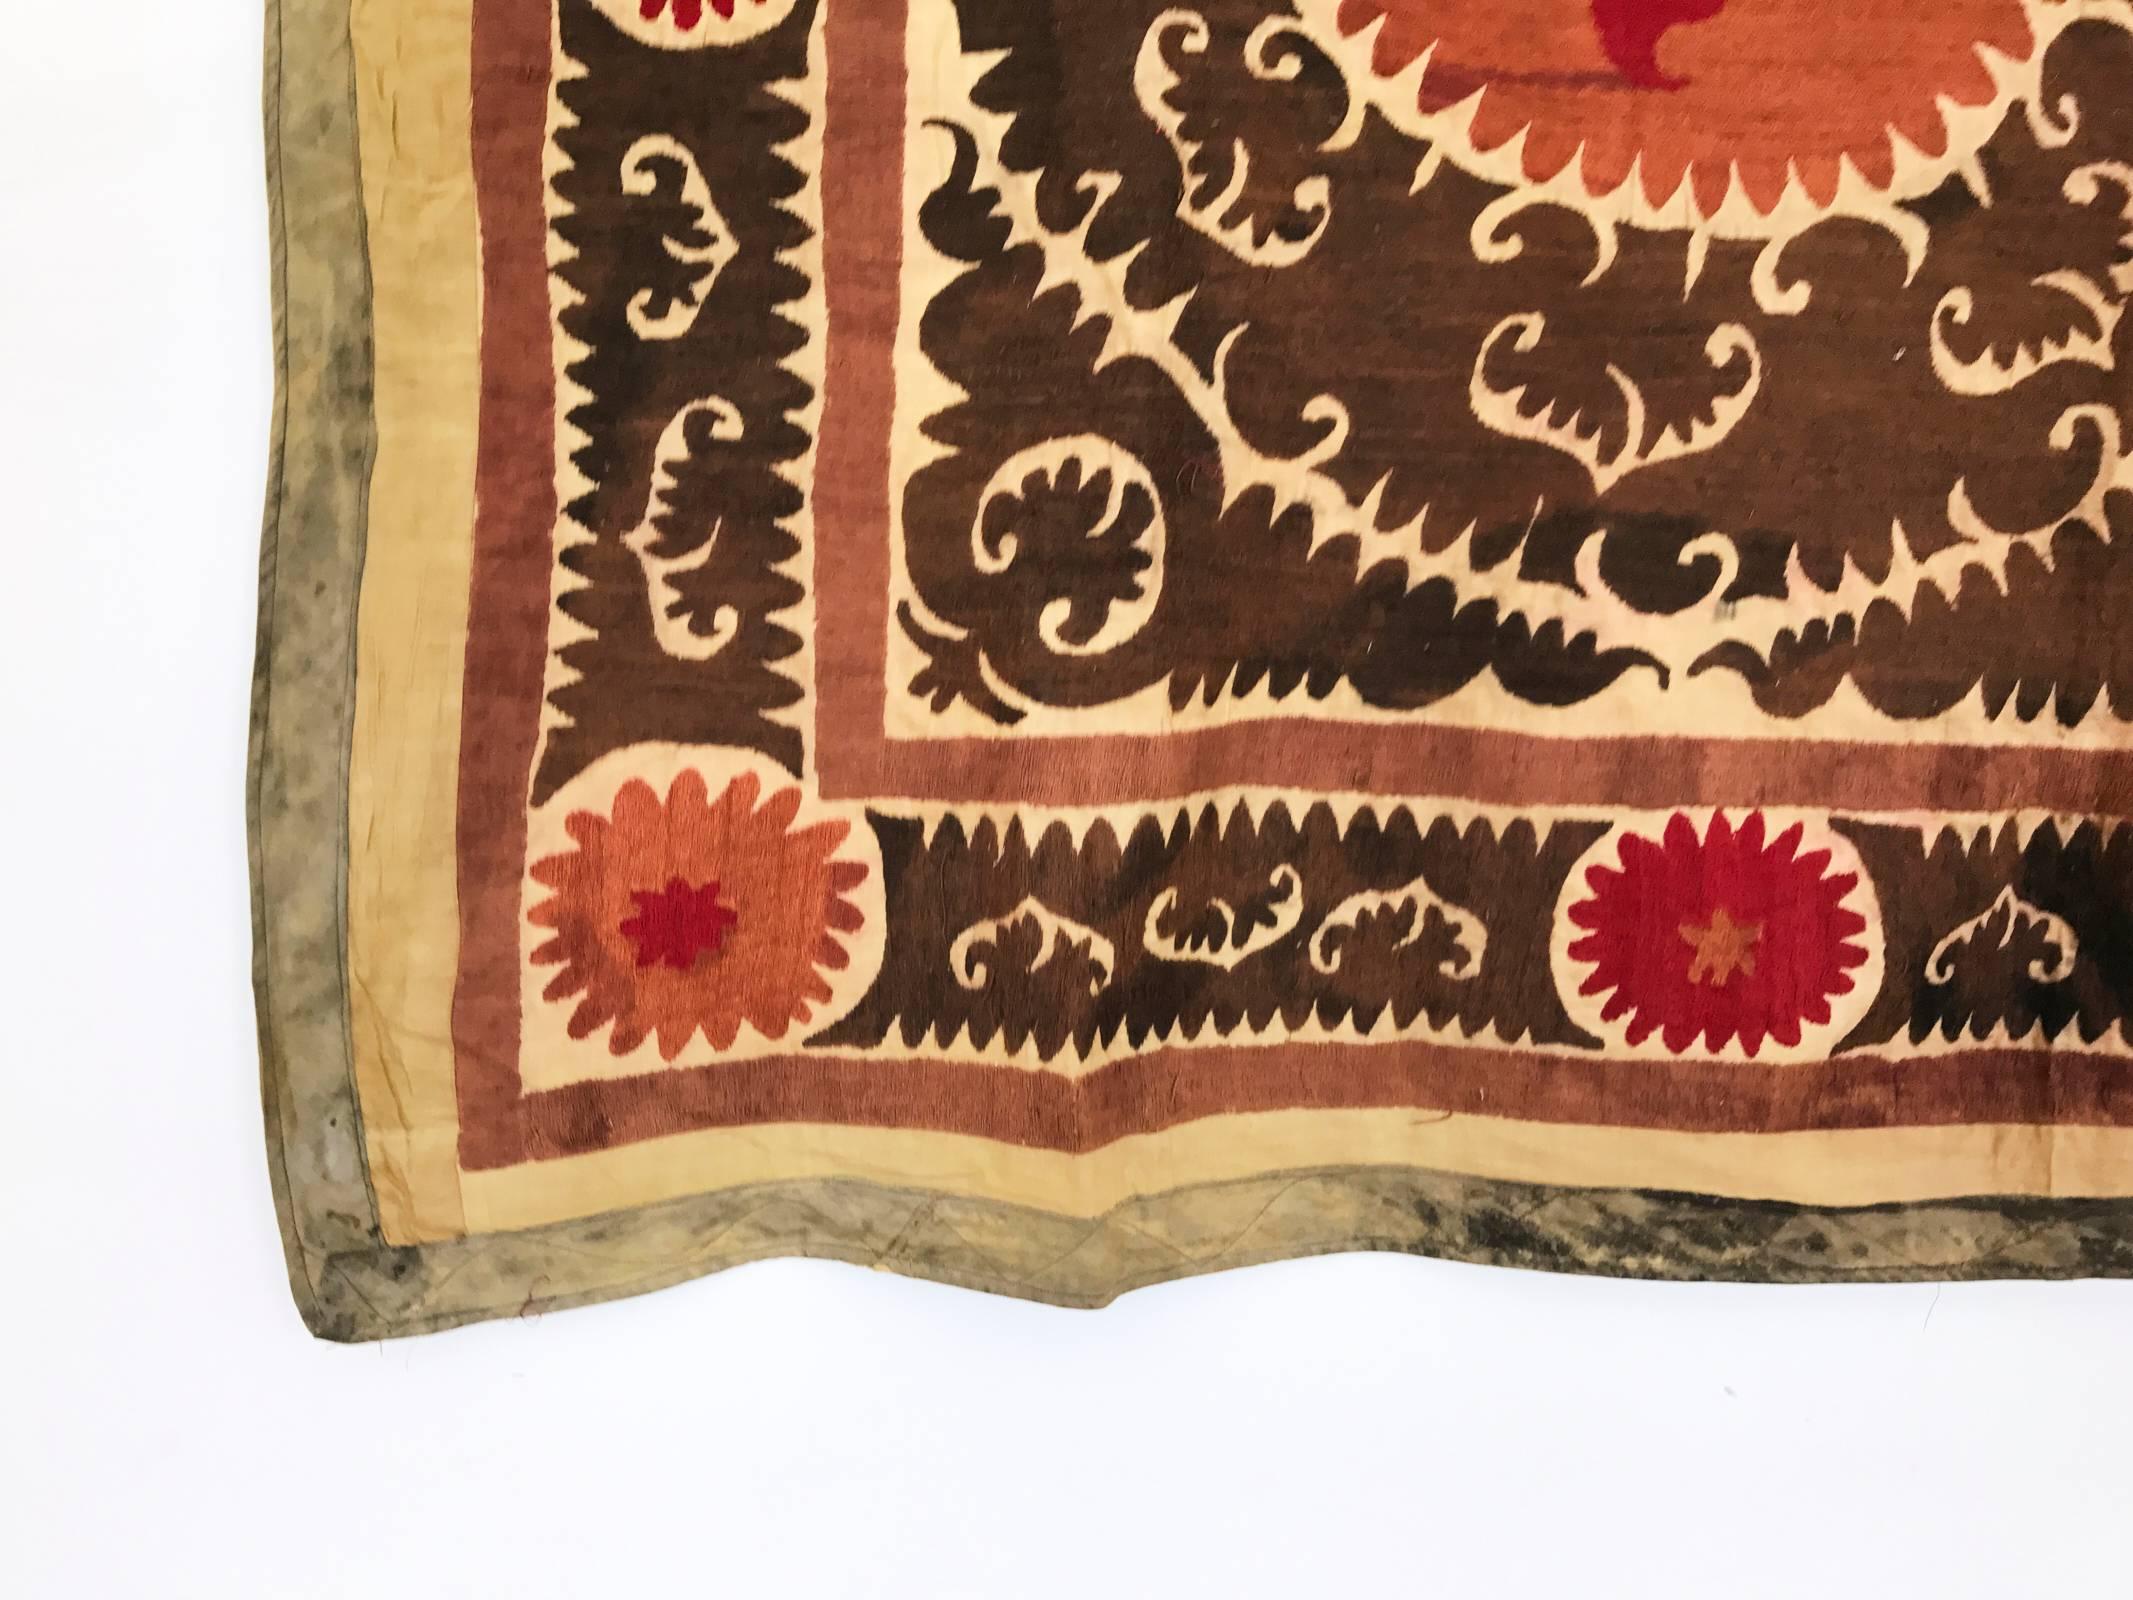 Intricate hand-embroidered needlework Uzbek Suzani with tan background and brown, pink, magenta and green geometric and paisley motifs throughout. Linen and cotton with silk threading. Very large size, can act as a bold wall hanging, bedspread or